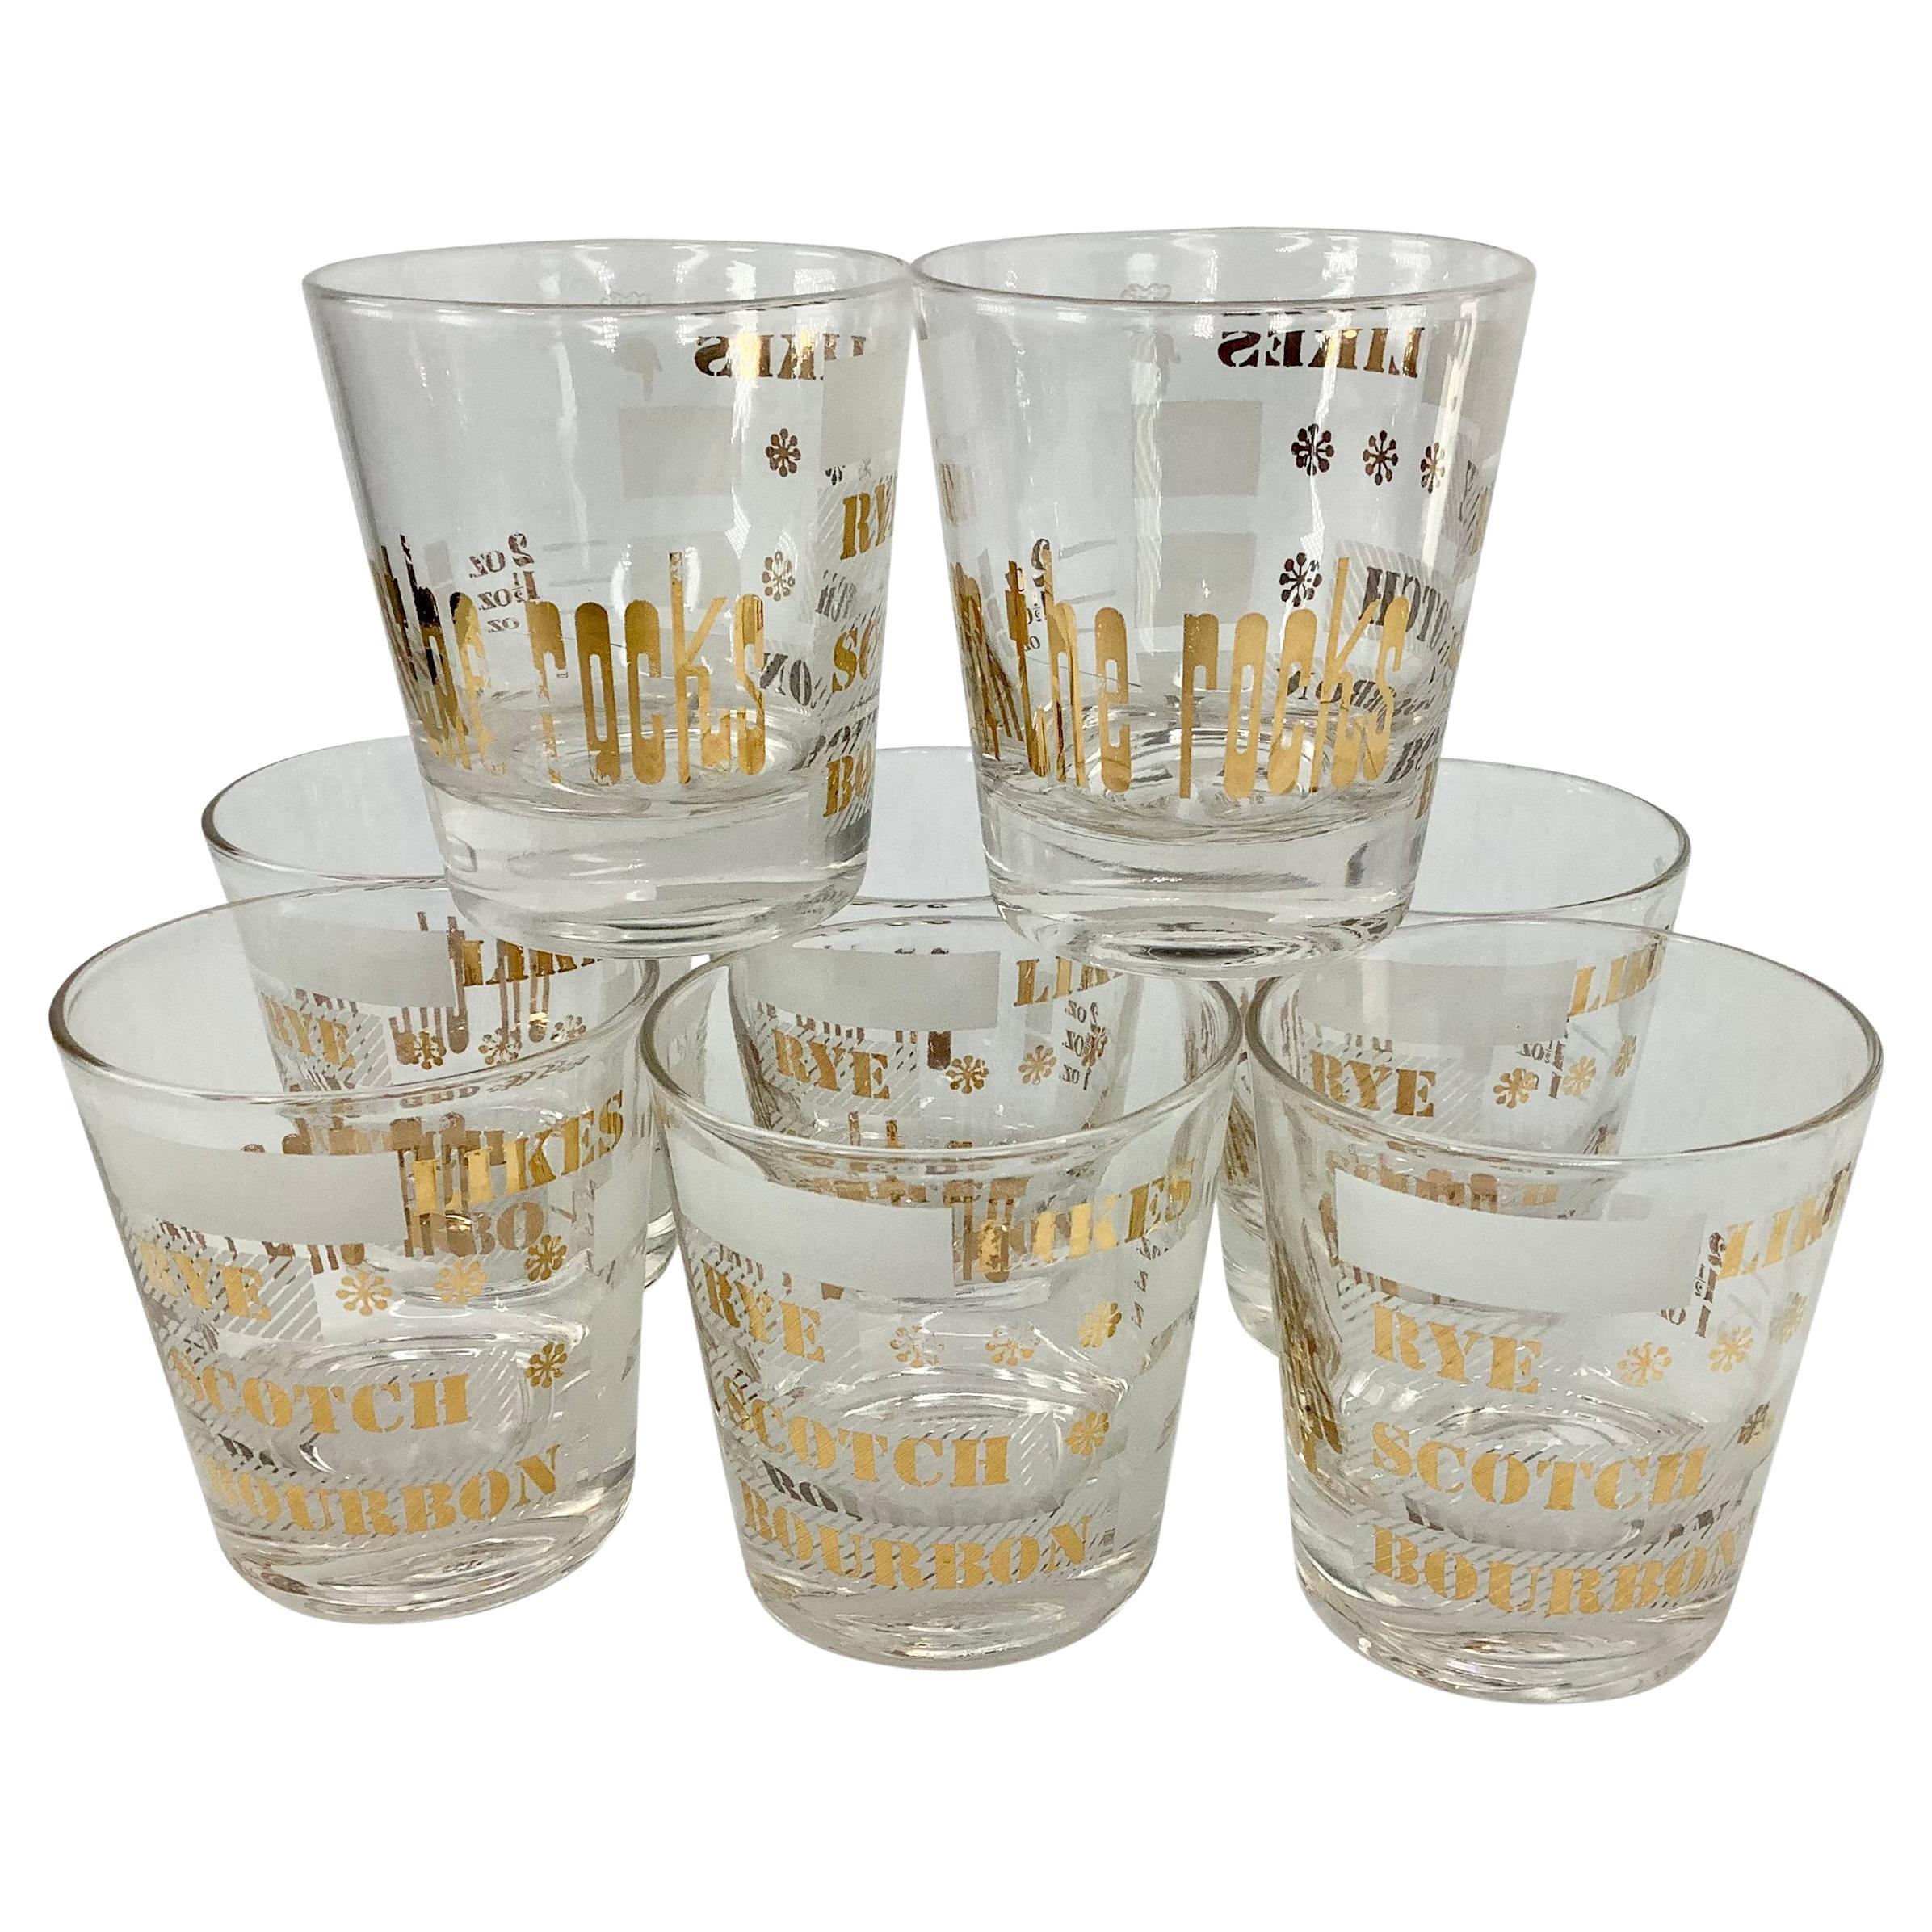 Vintage "On the Rocks" Personalizable Old Fashioned Rocks Glasses - Set of 8 For Sale